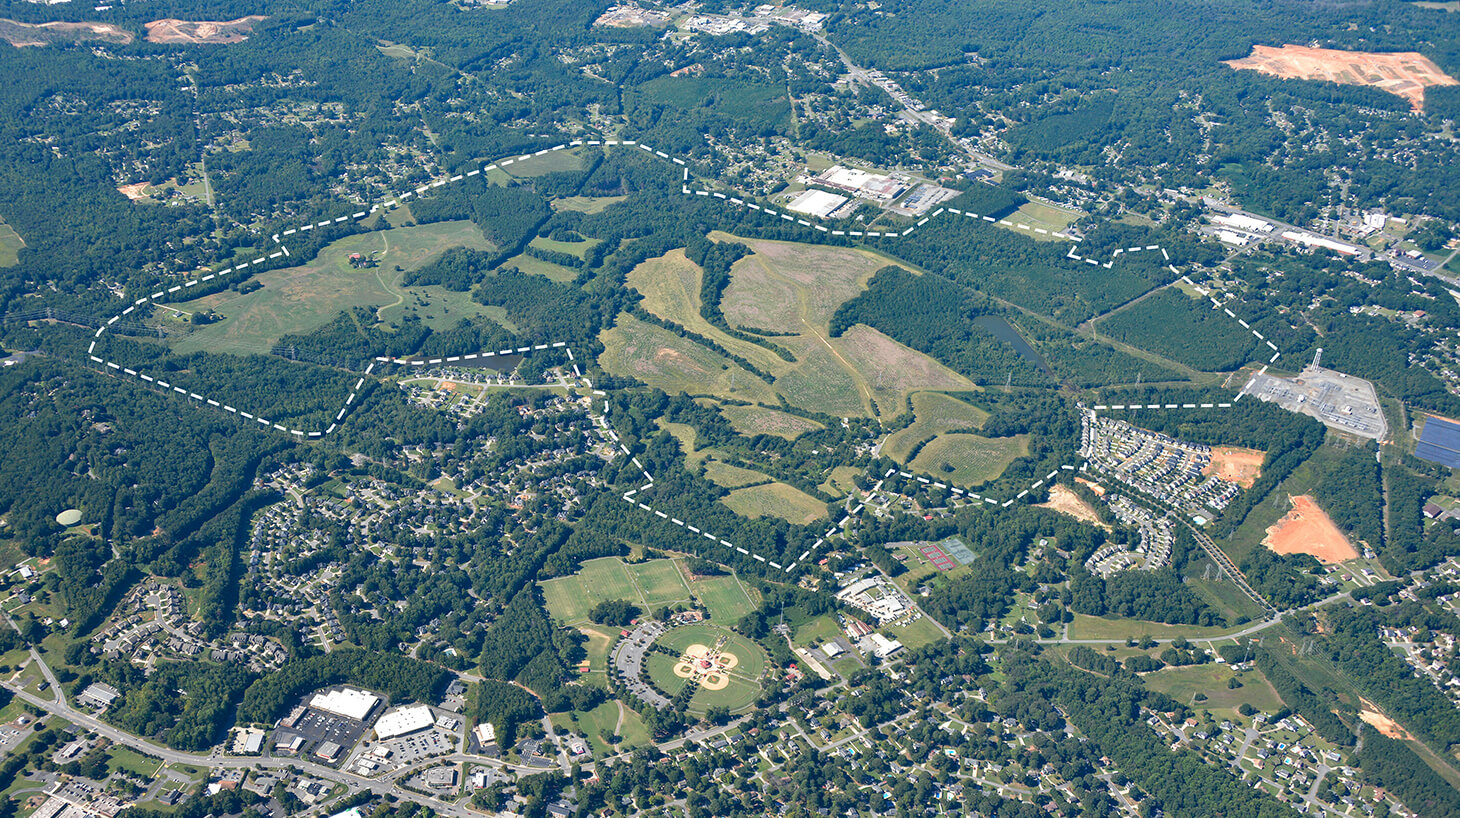 Arizona developer seeking approvals for massive residential project on 326 acres in Gastonia